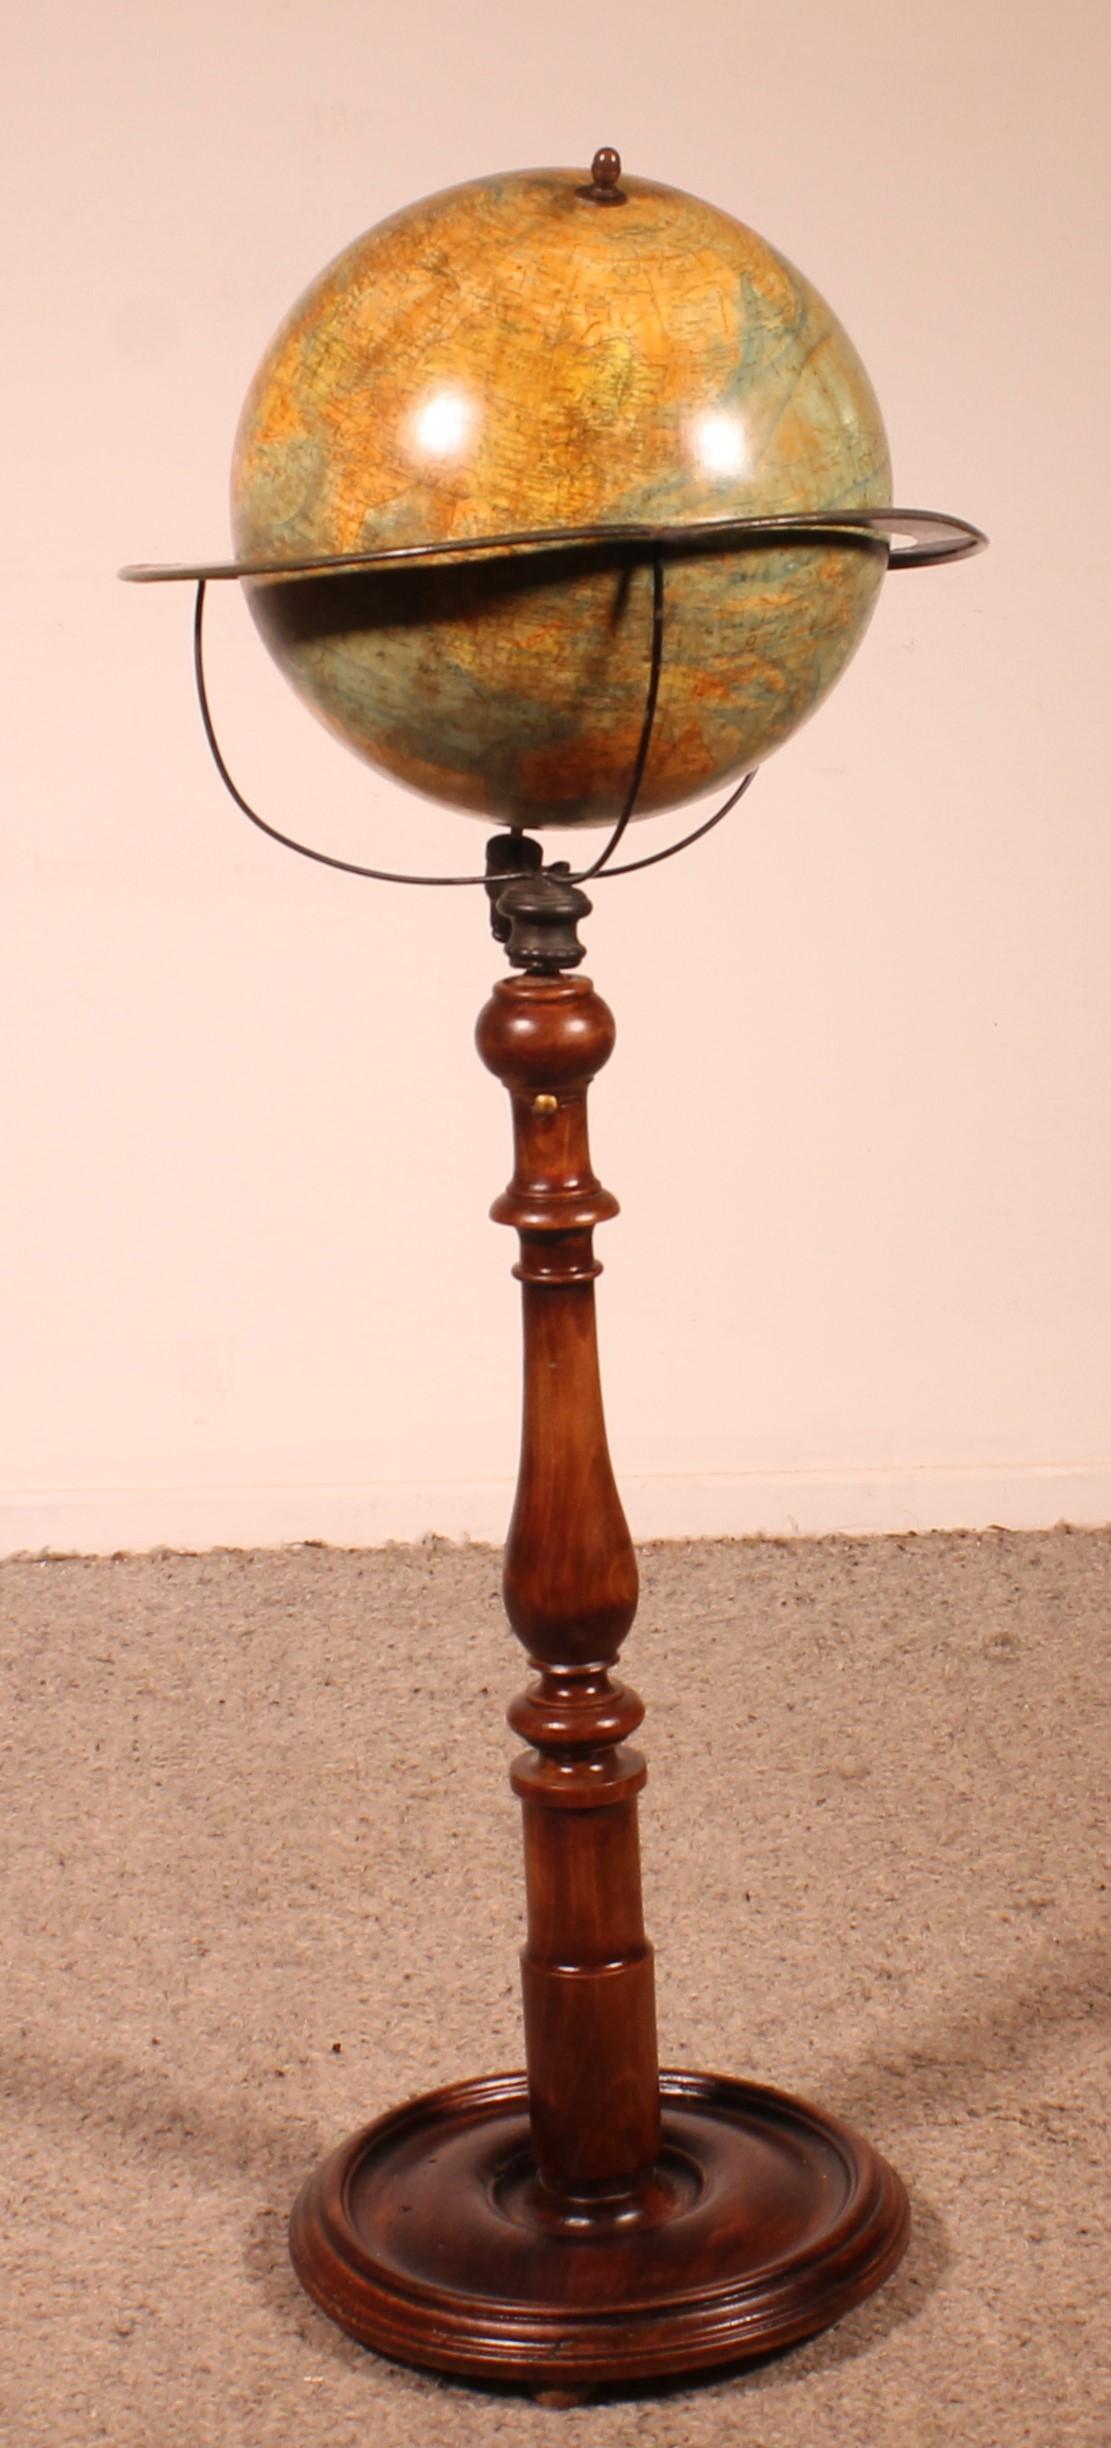 French A Library Terrestrial Globe On Stand From J.forest Paris From The 19th Century For Sale